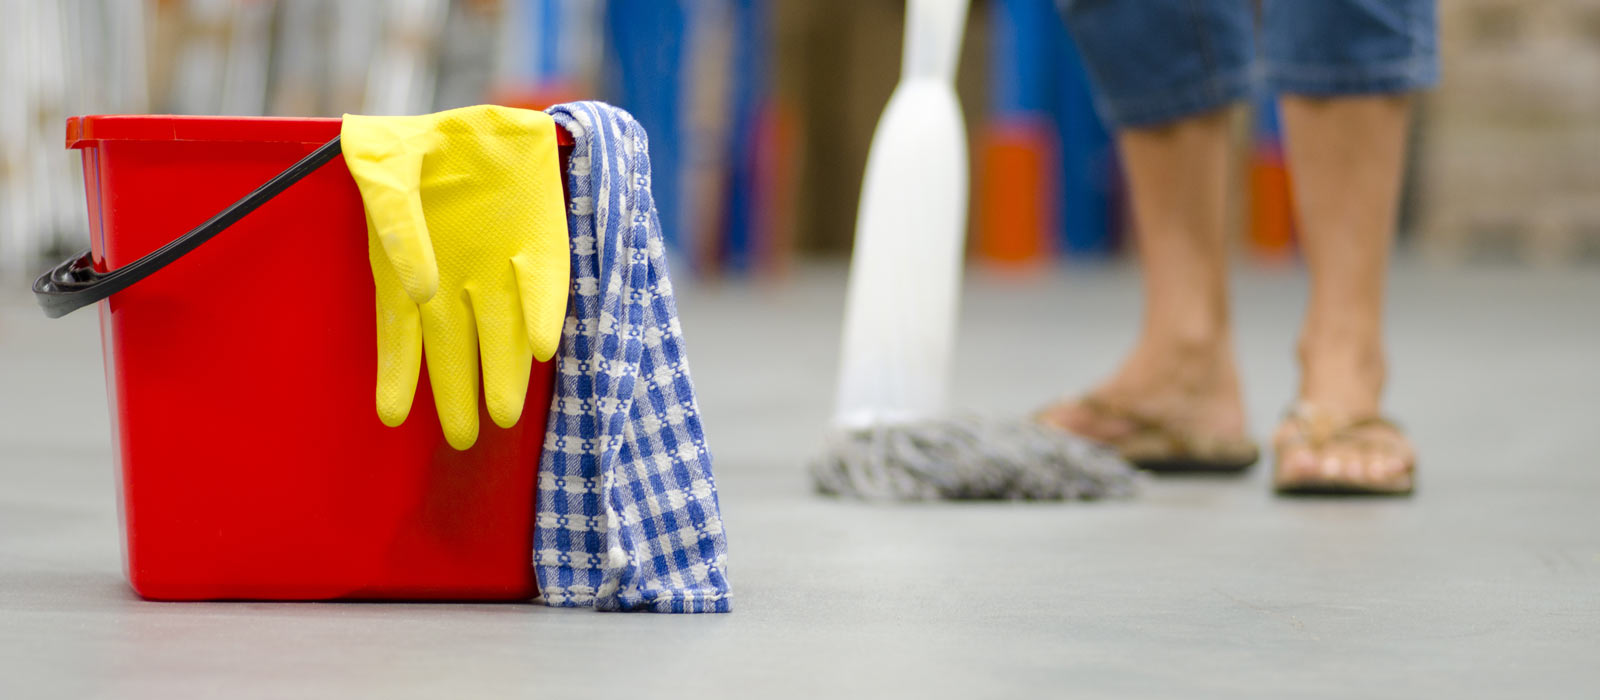 Cleaning your home. Great Tips from Grate Seal